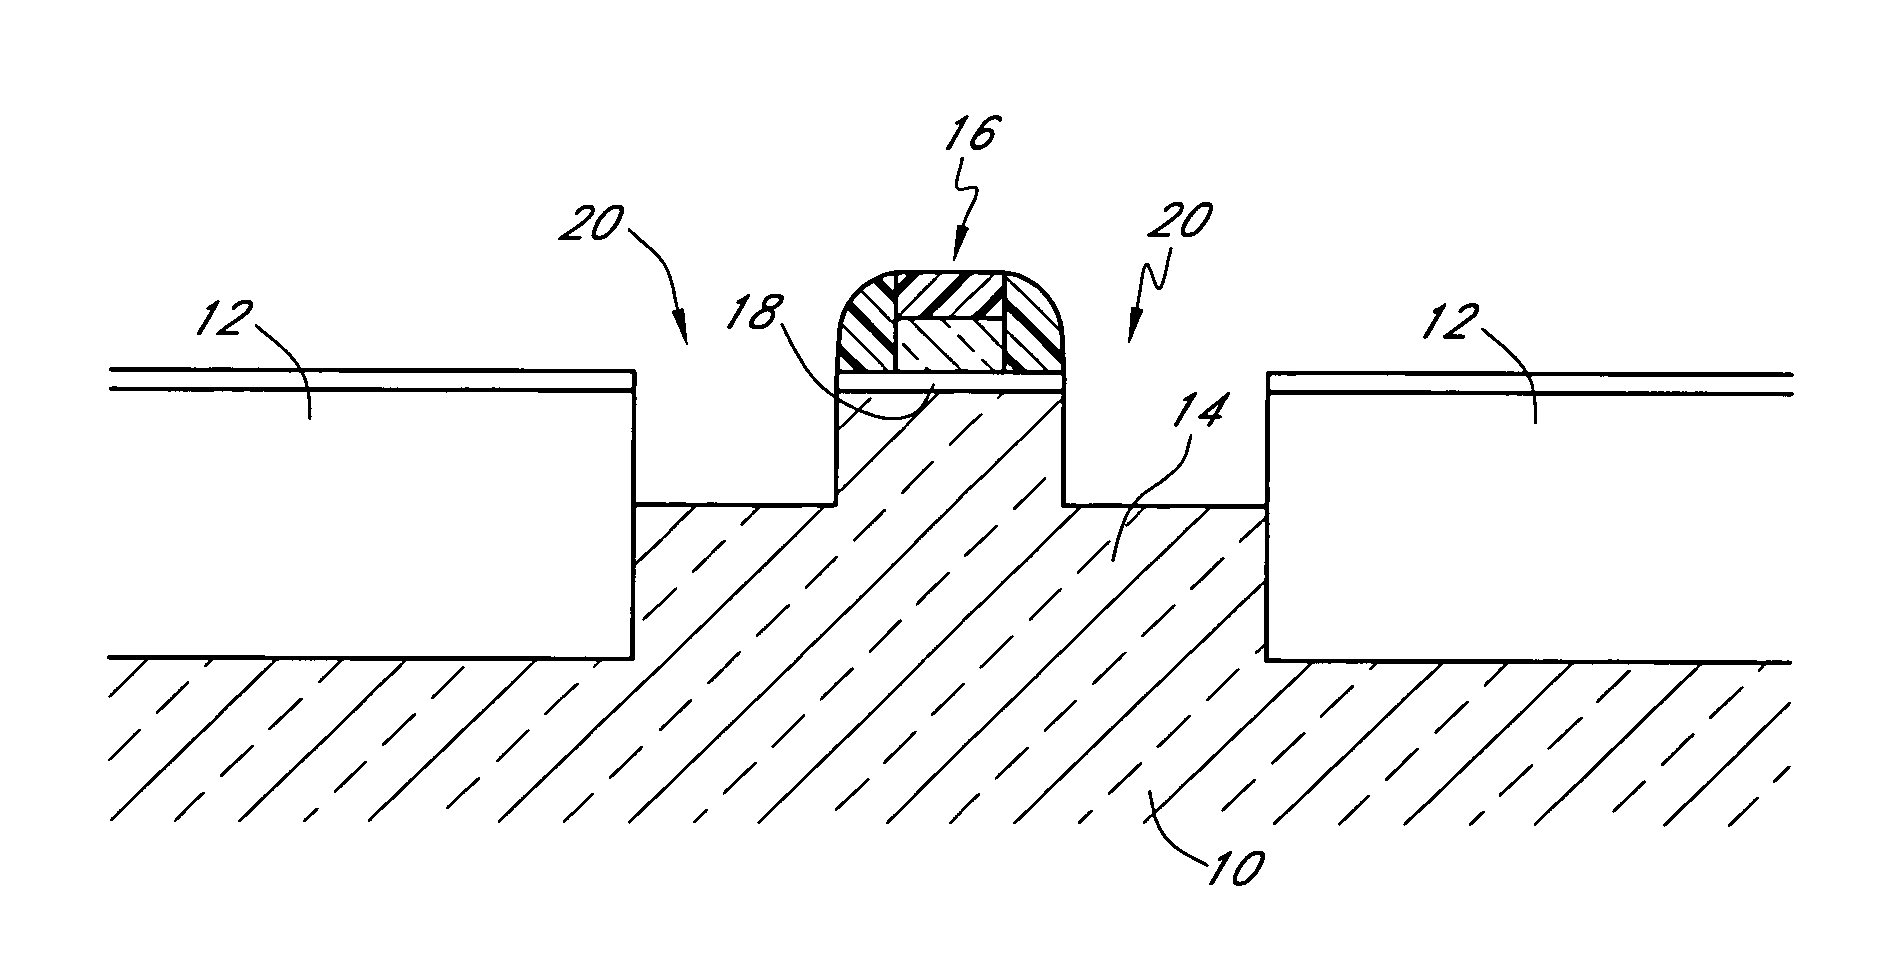 Selective deposition of silicon-containing films